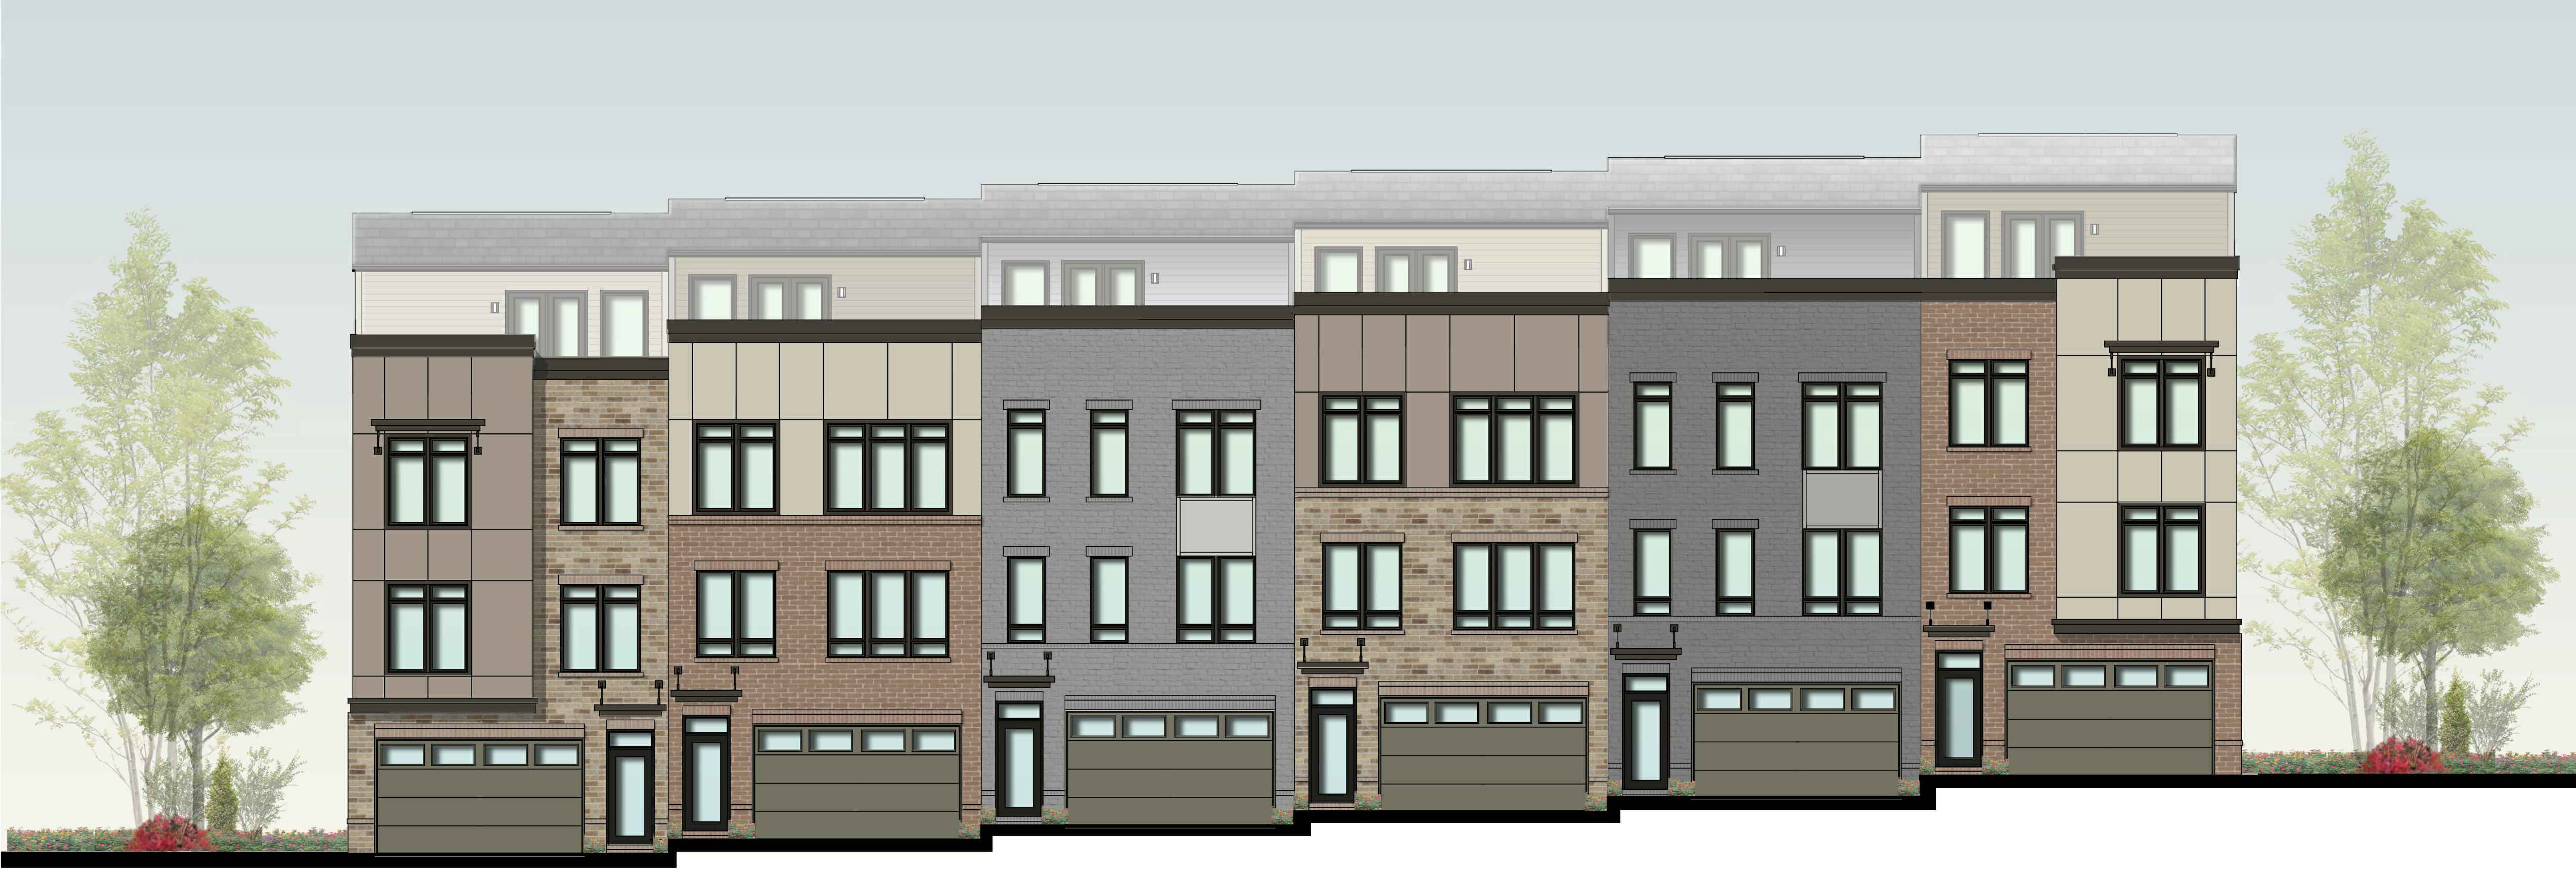 Architectural drawing of the new townhomes at the new Lake Anne House property.